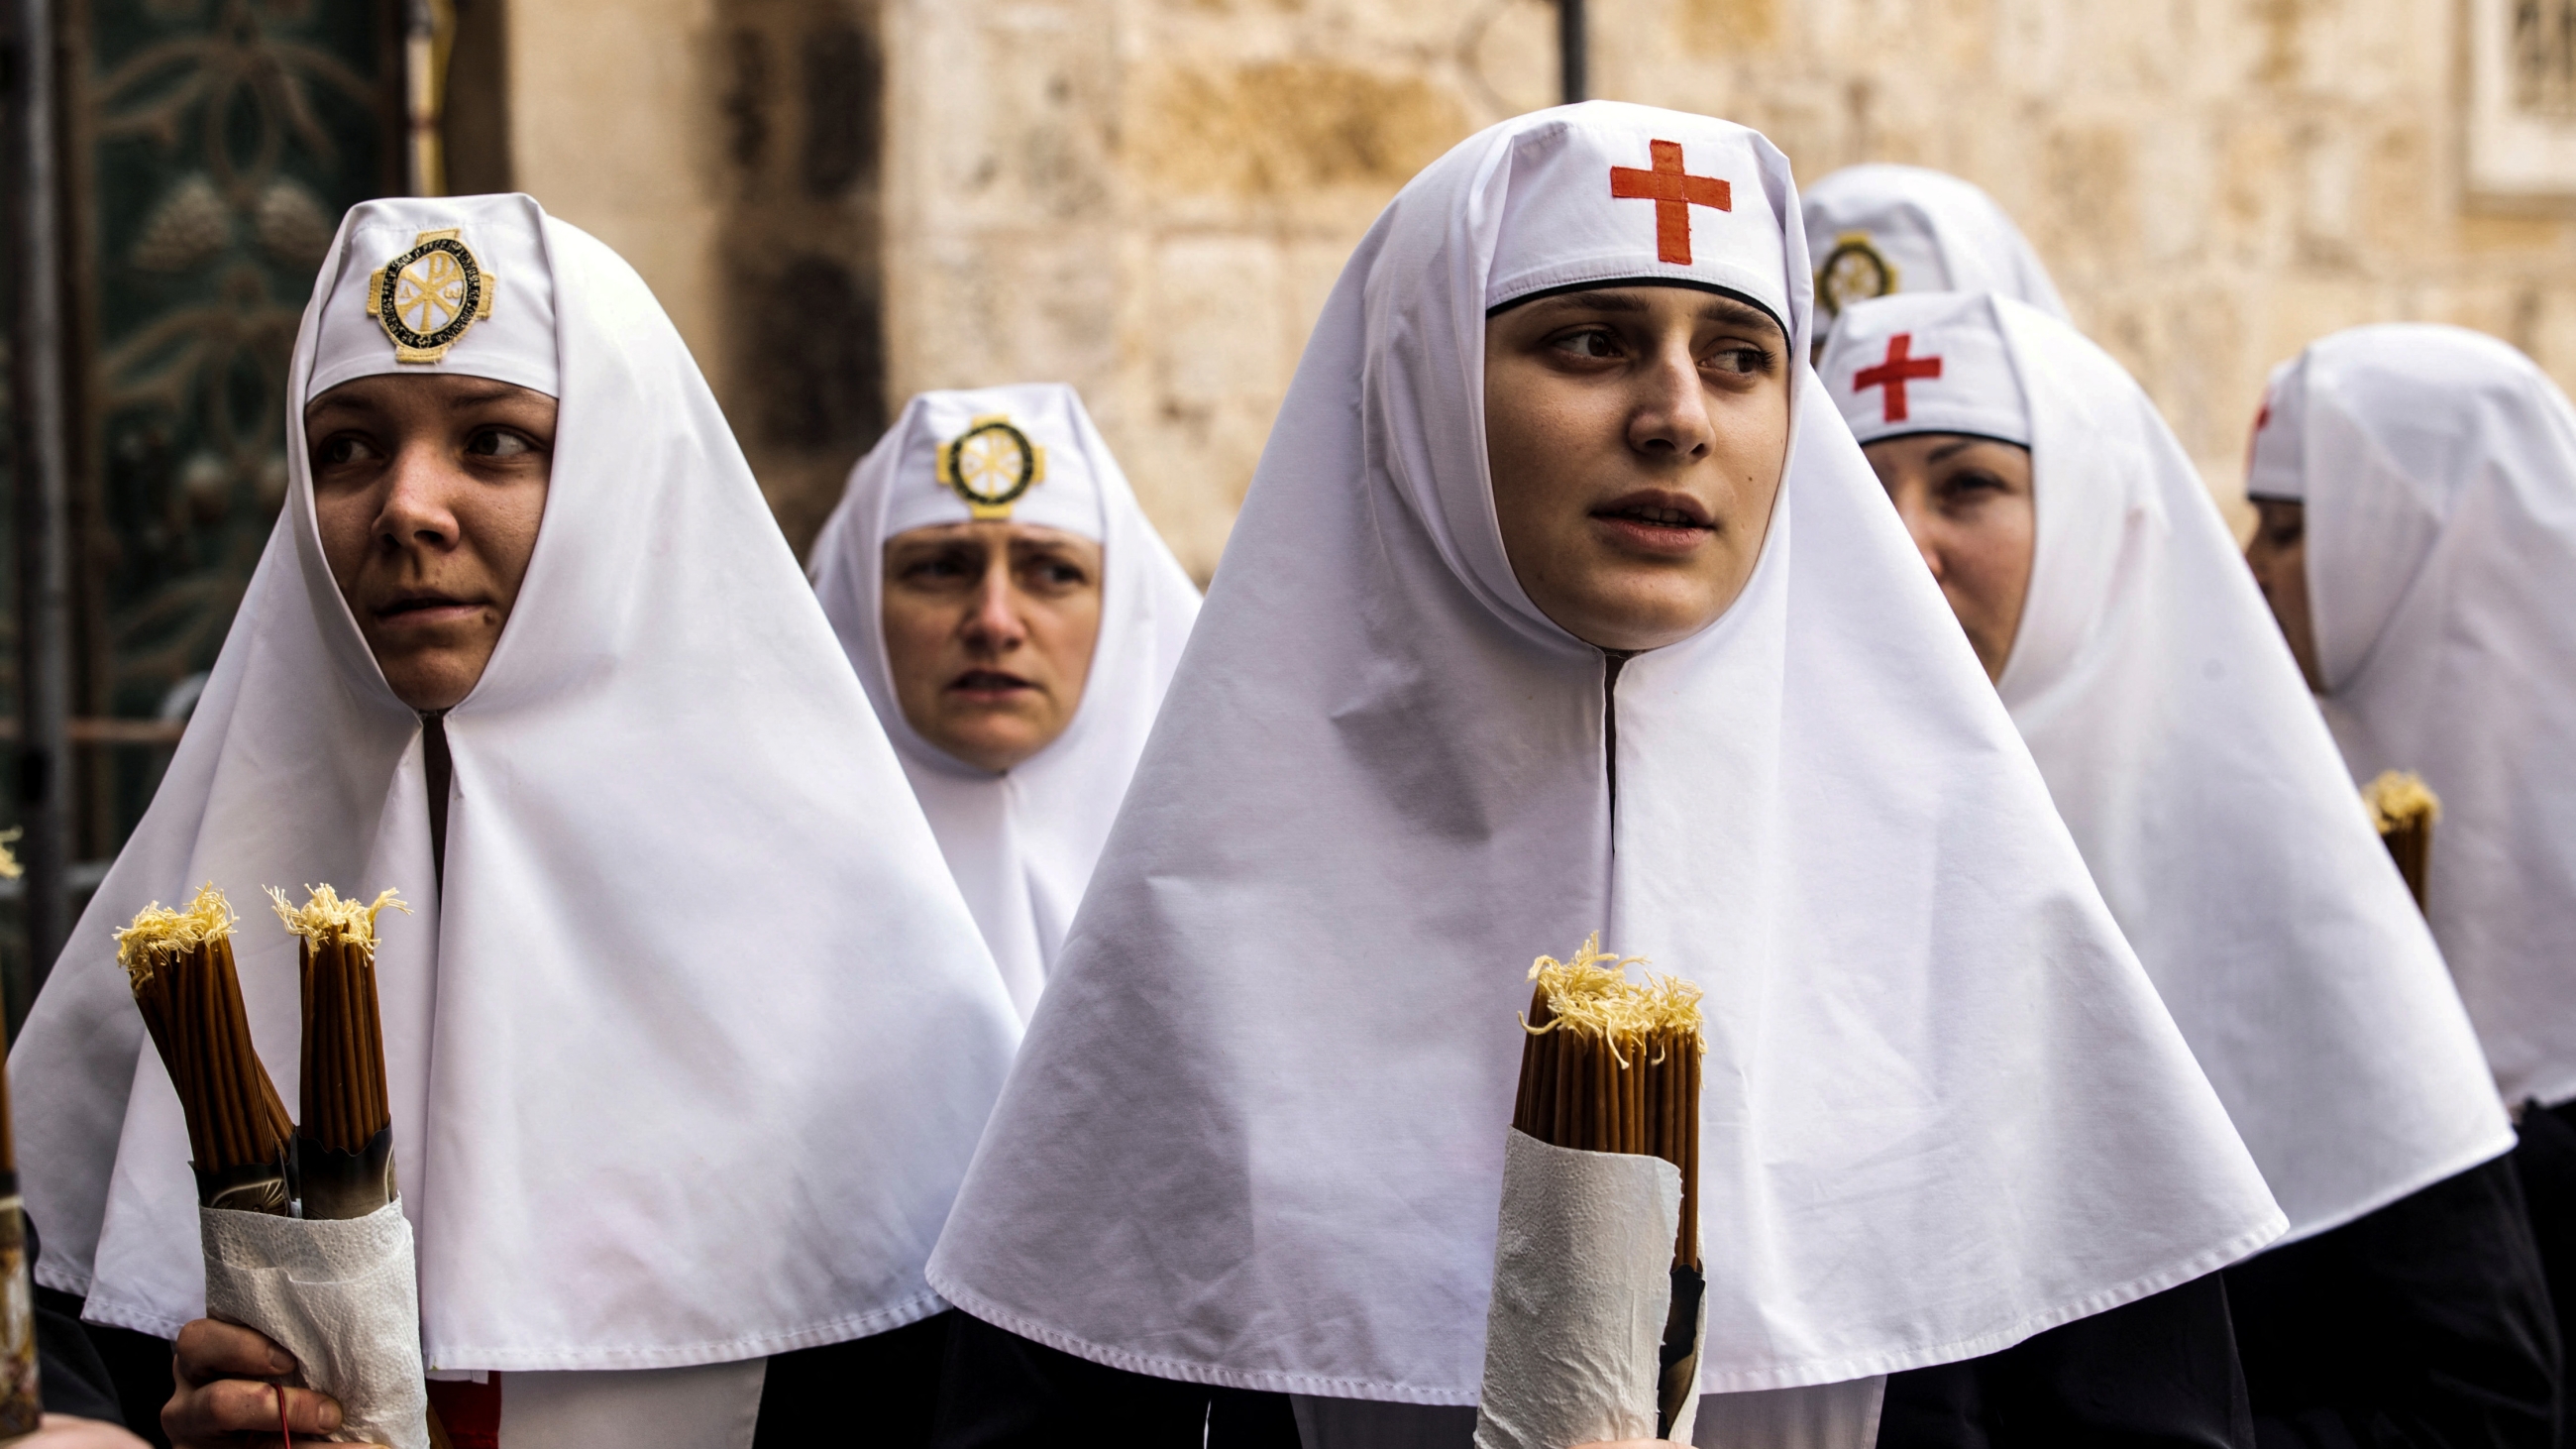 Nuns hold candles as Orthodox Christian worshippers attend the Holy Fire ceremony at the Church of the Holy Sepulchre in Jerusalem's Old City on 15 April 2023 (Reuters)